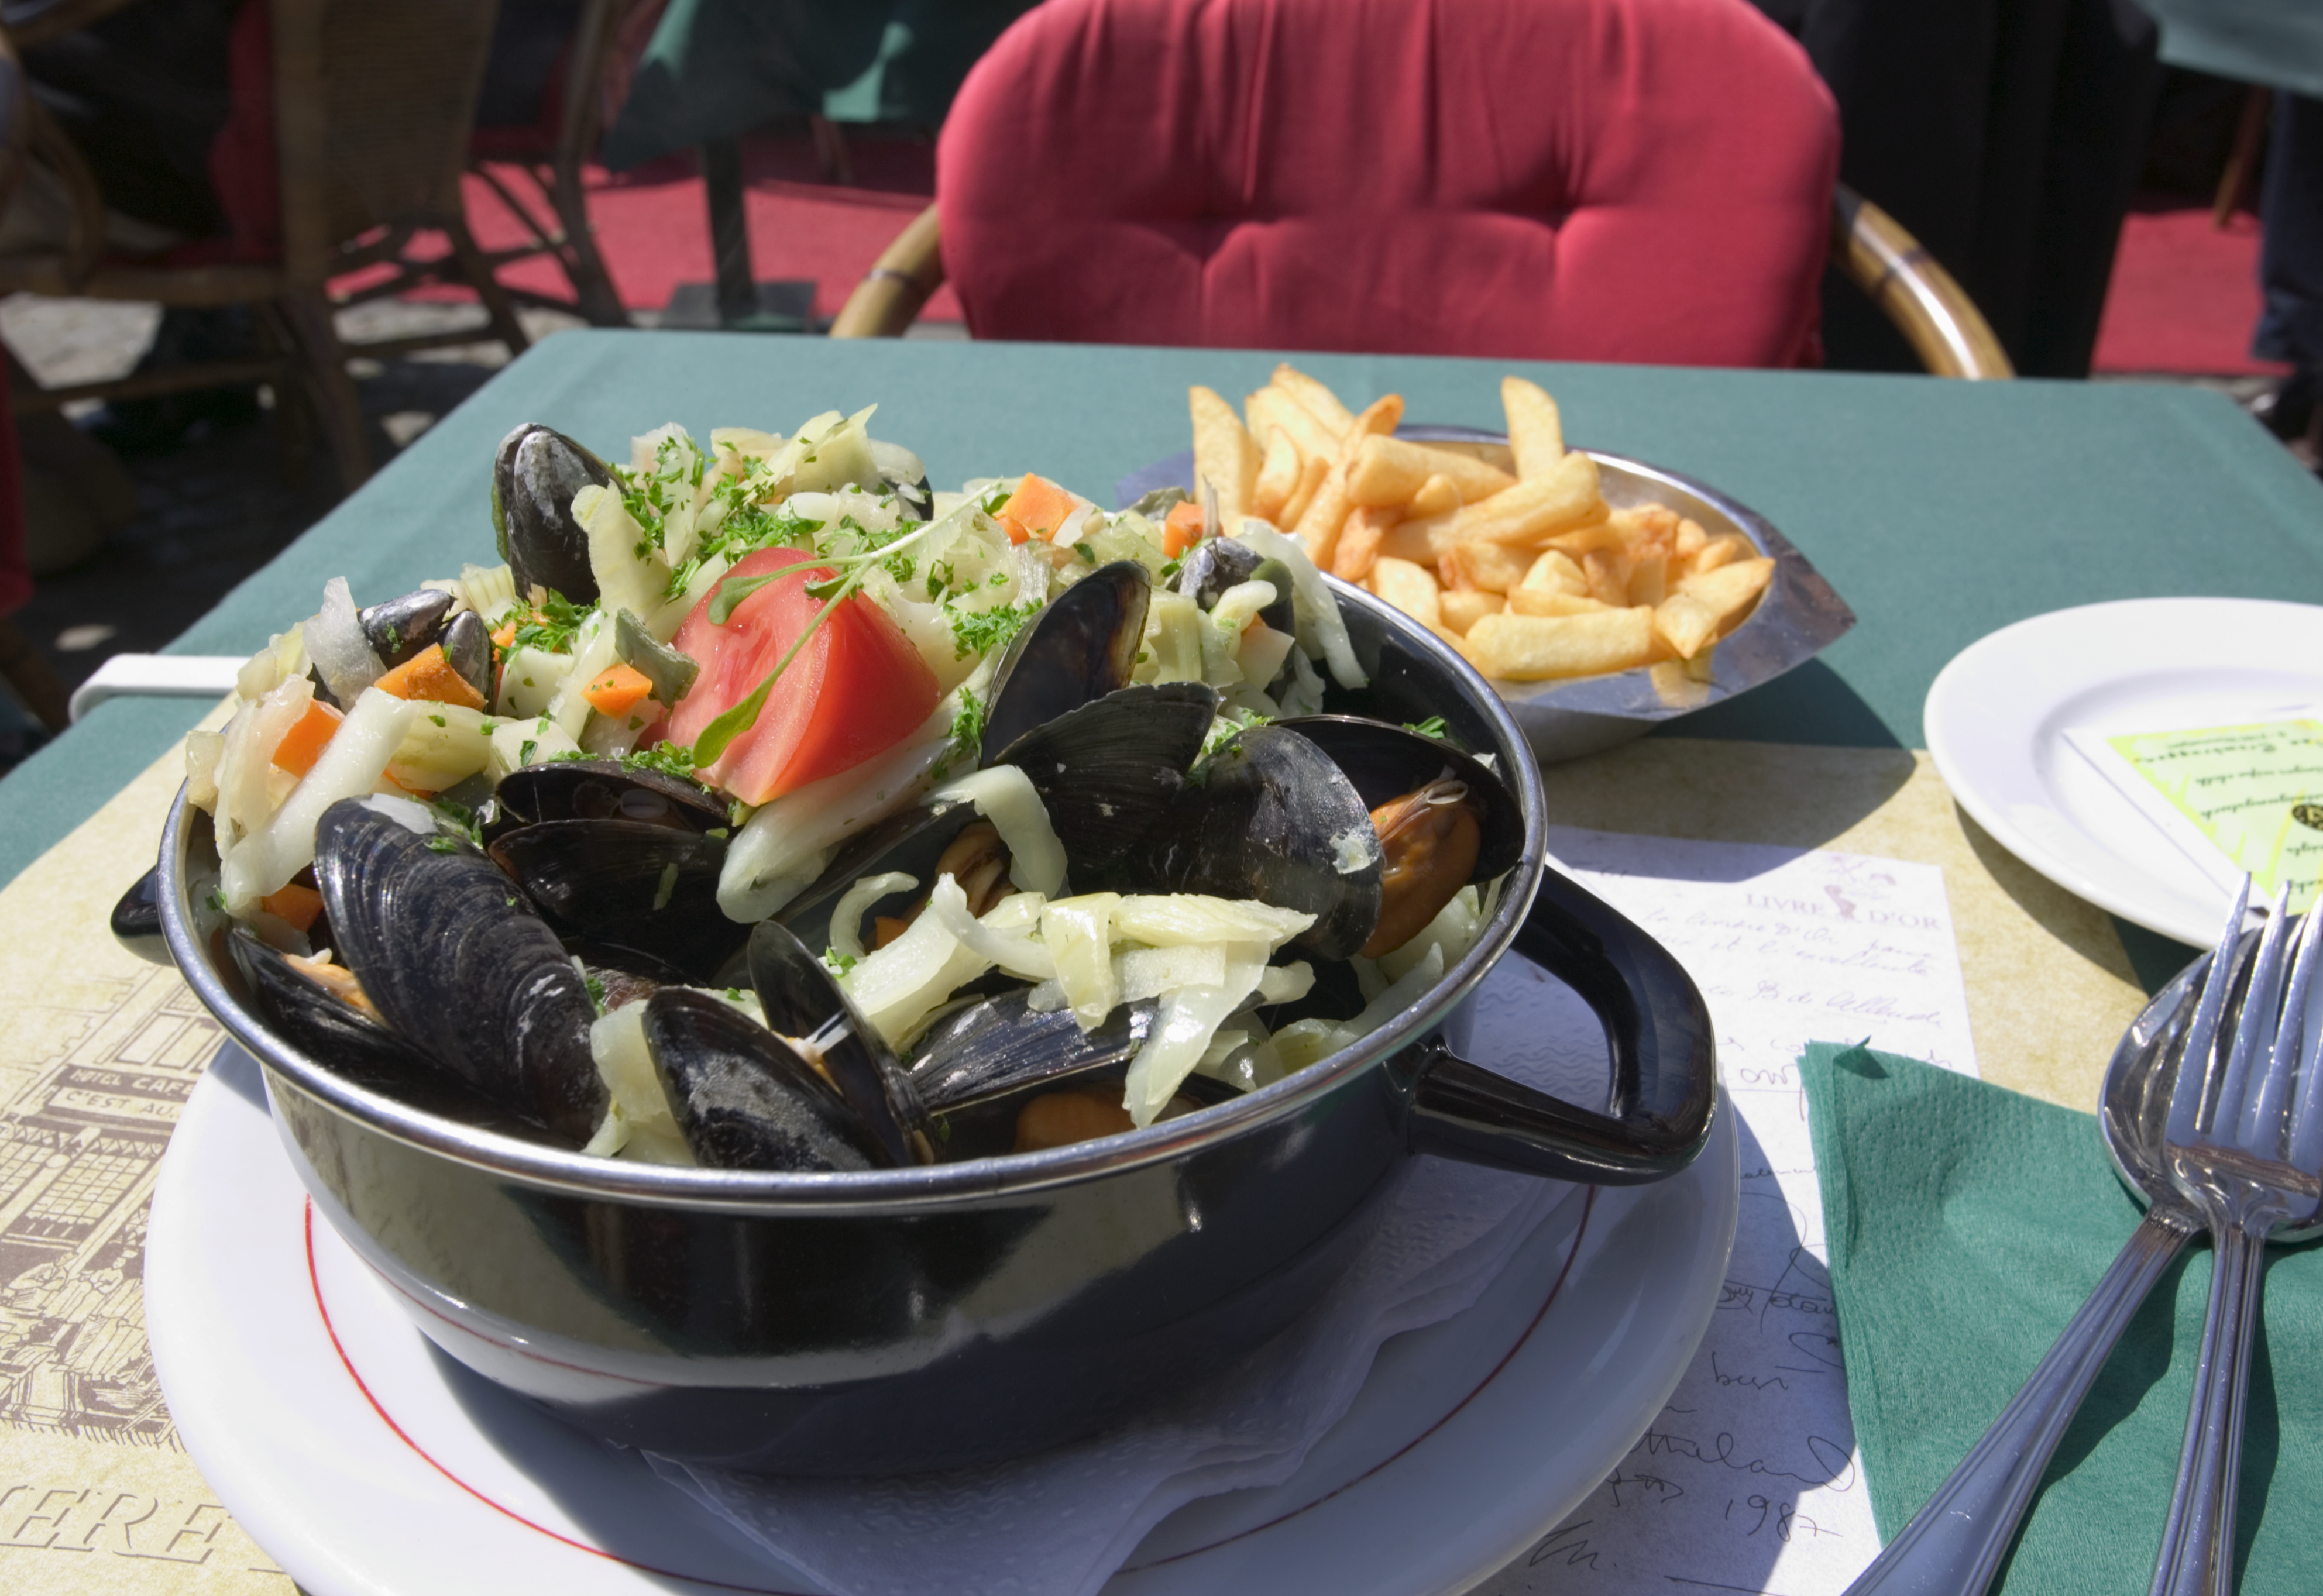 We stopped for lunch at one of the countless bars serving mussels